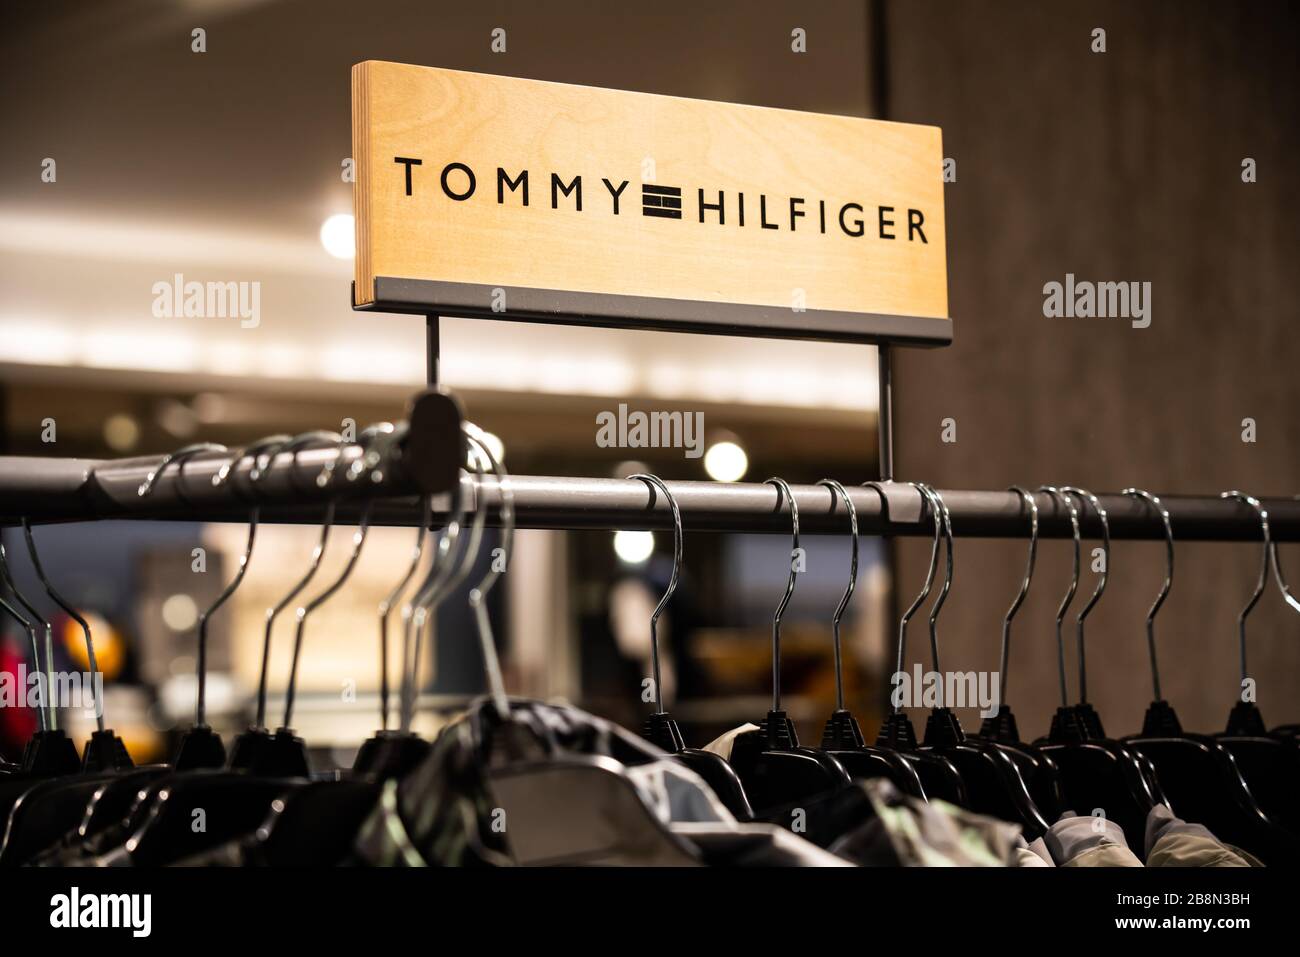 Tommy Hilfiger Store In New York City Usa Stock Photo - Download Image Now  - Adult, Advertisement, Architectural Column - iStock